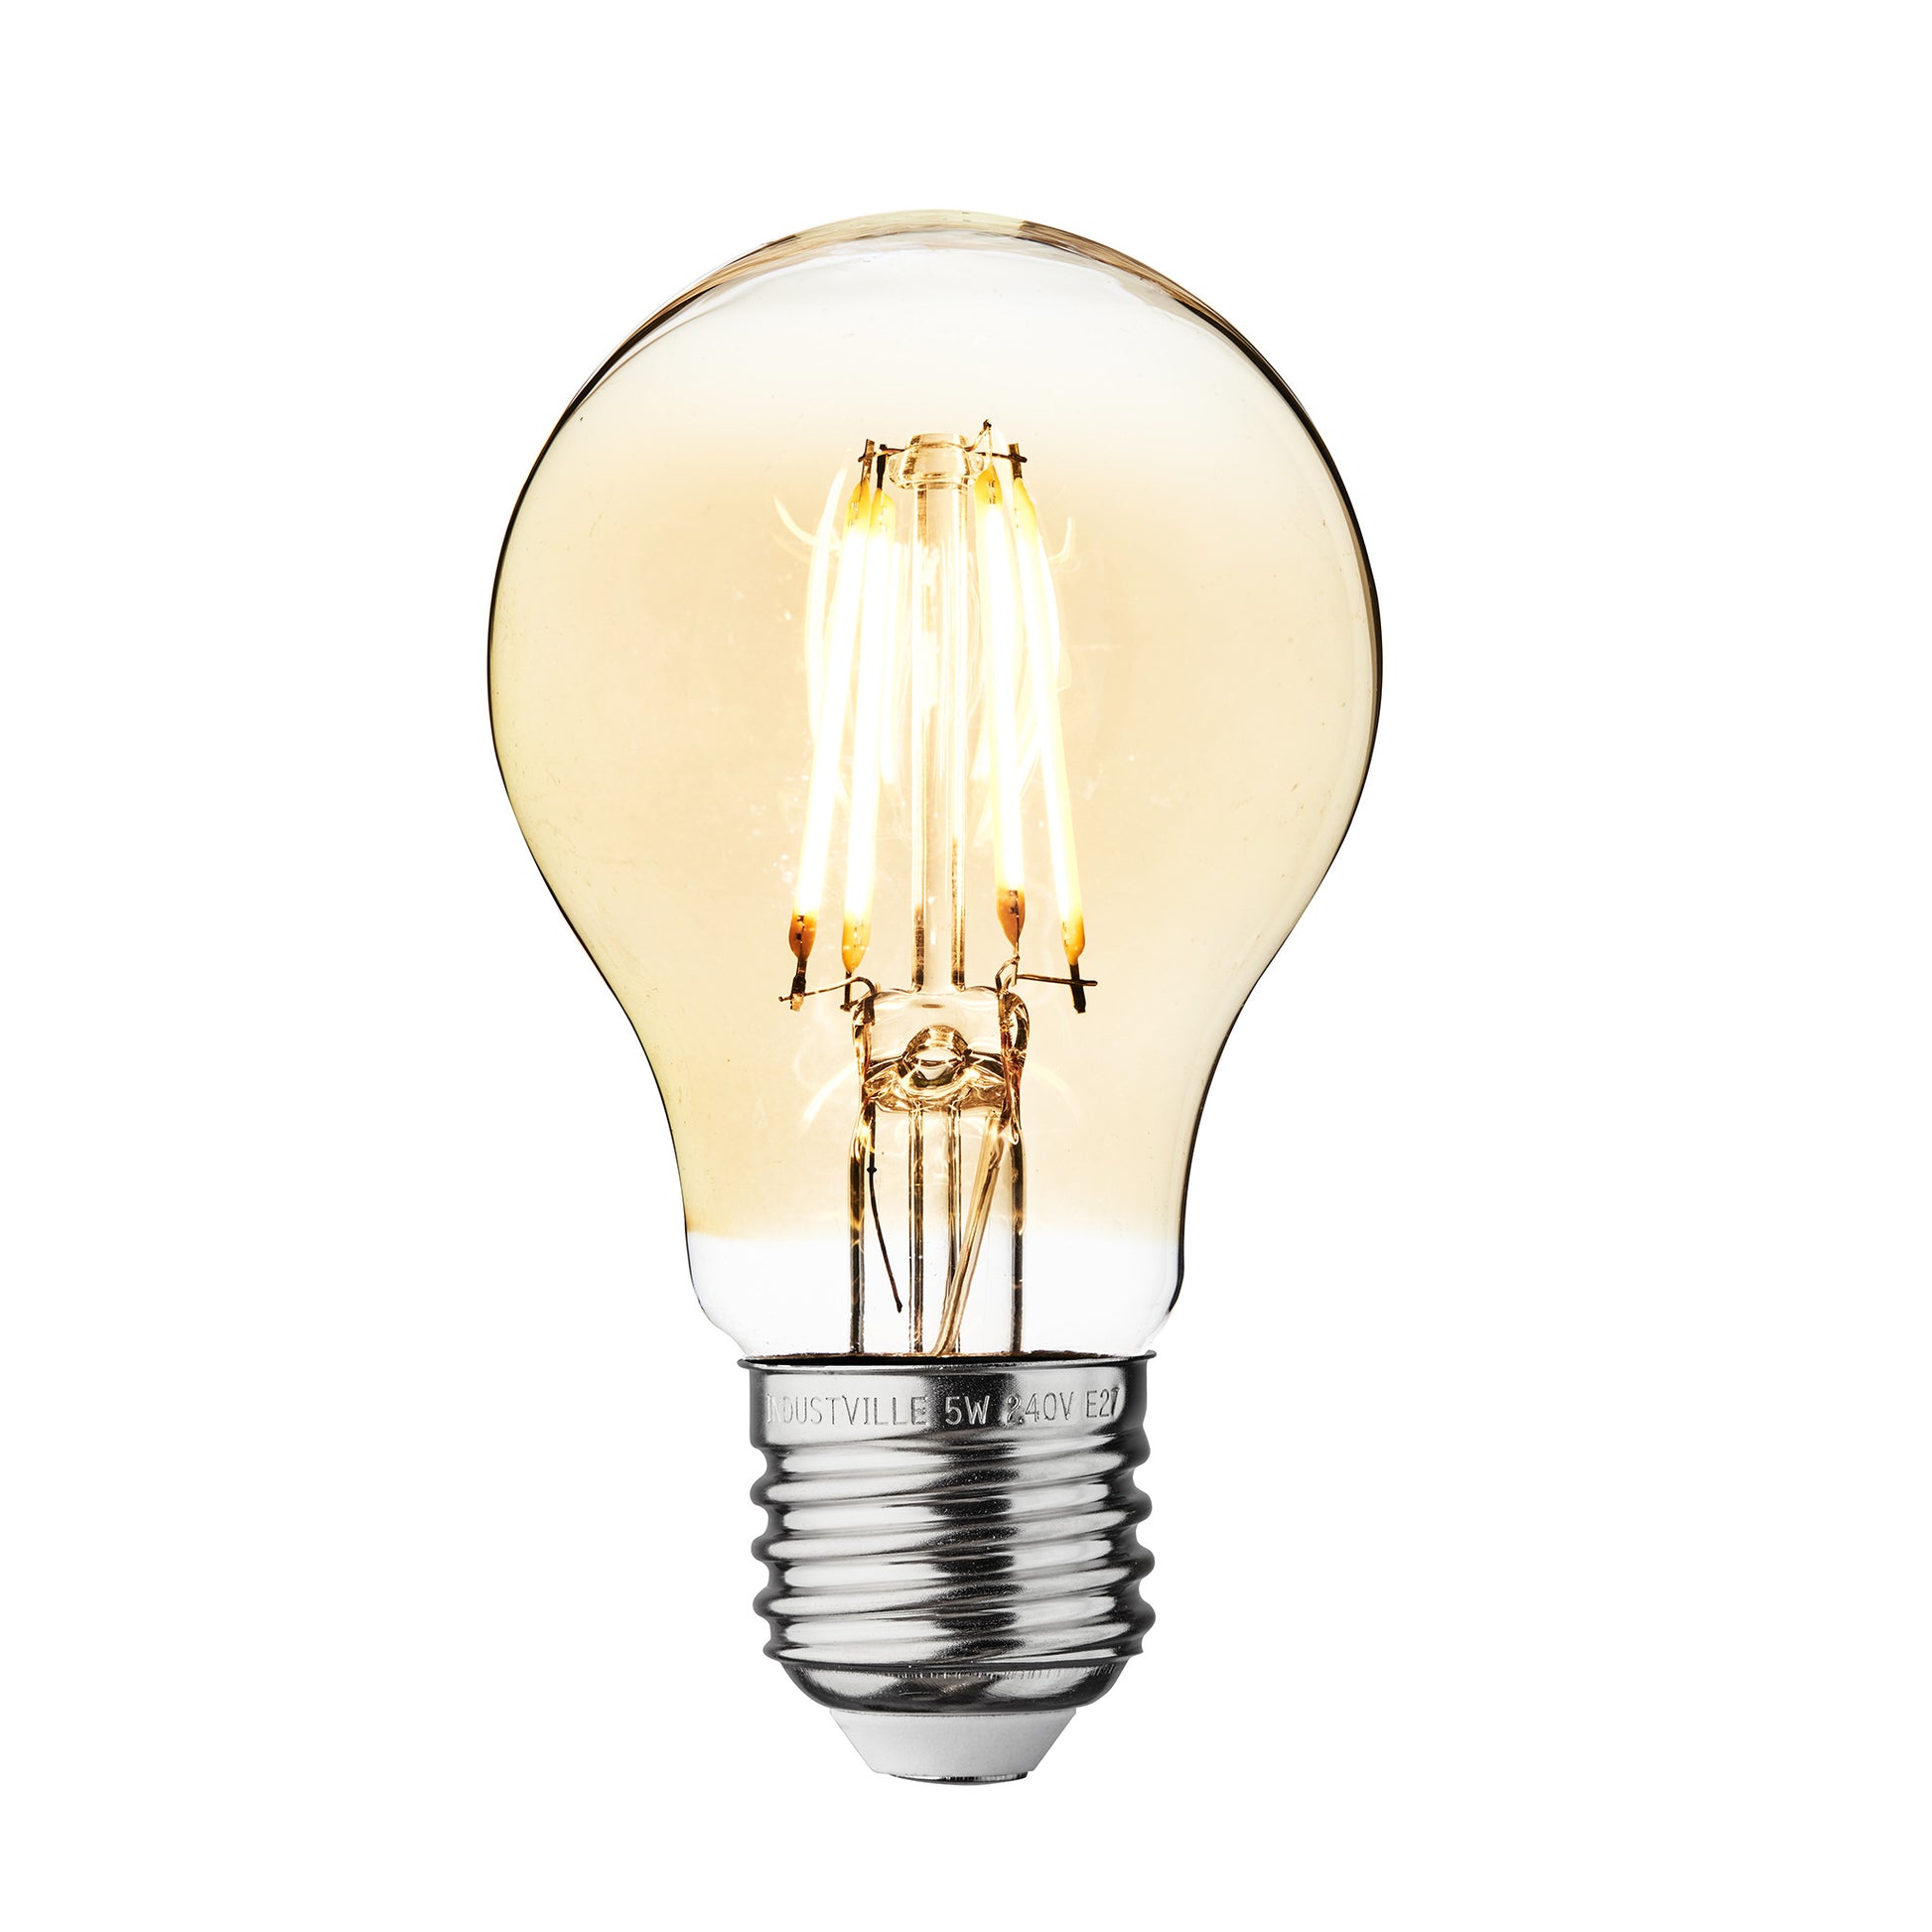 A60 E27 6W Dimmable Classic Vintage LED Filament Light Bulb - Shop for LED lights - Transformers - Lampshades - Holders | LEDSone UK